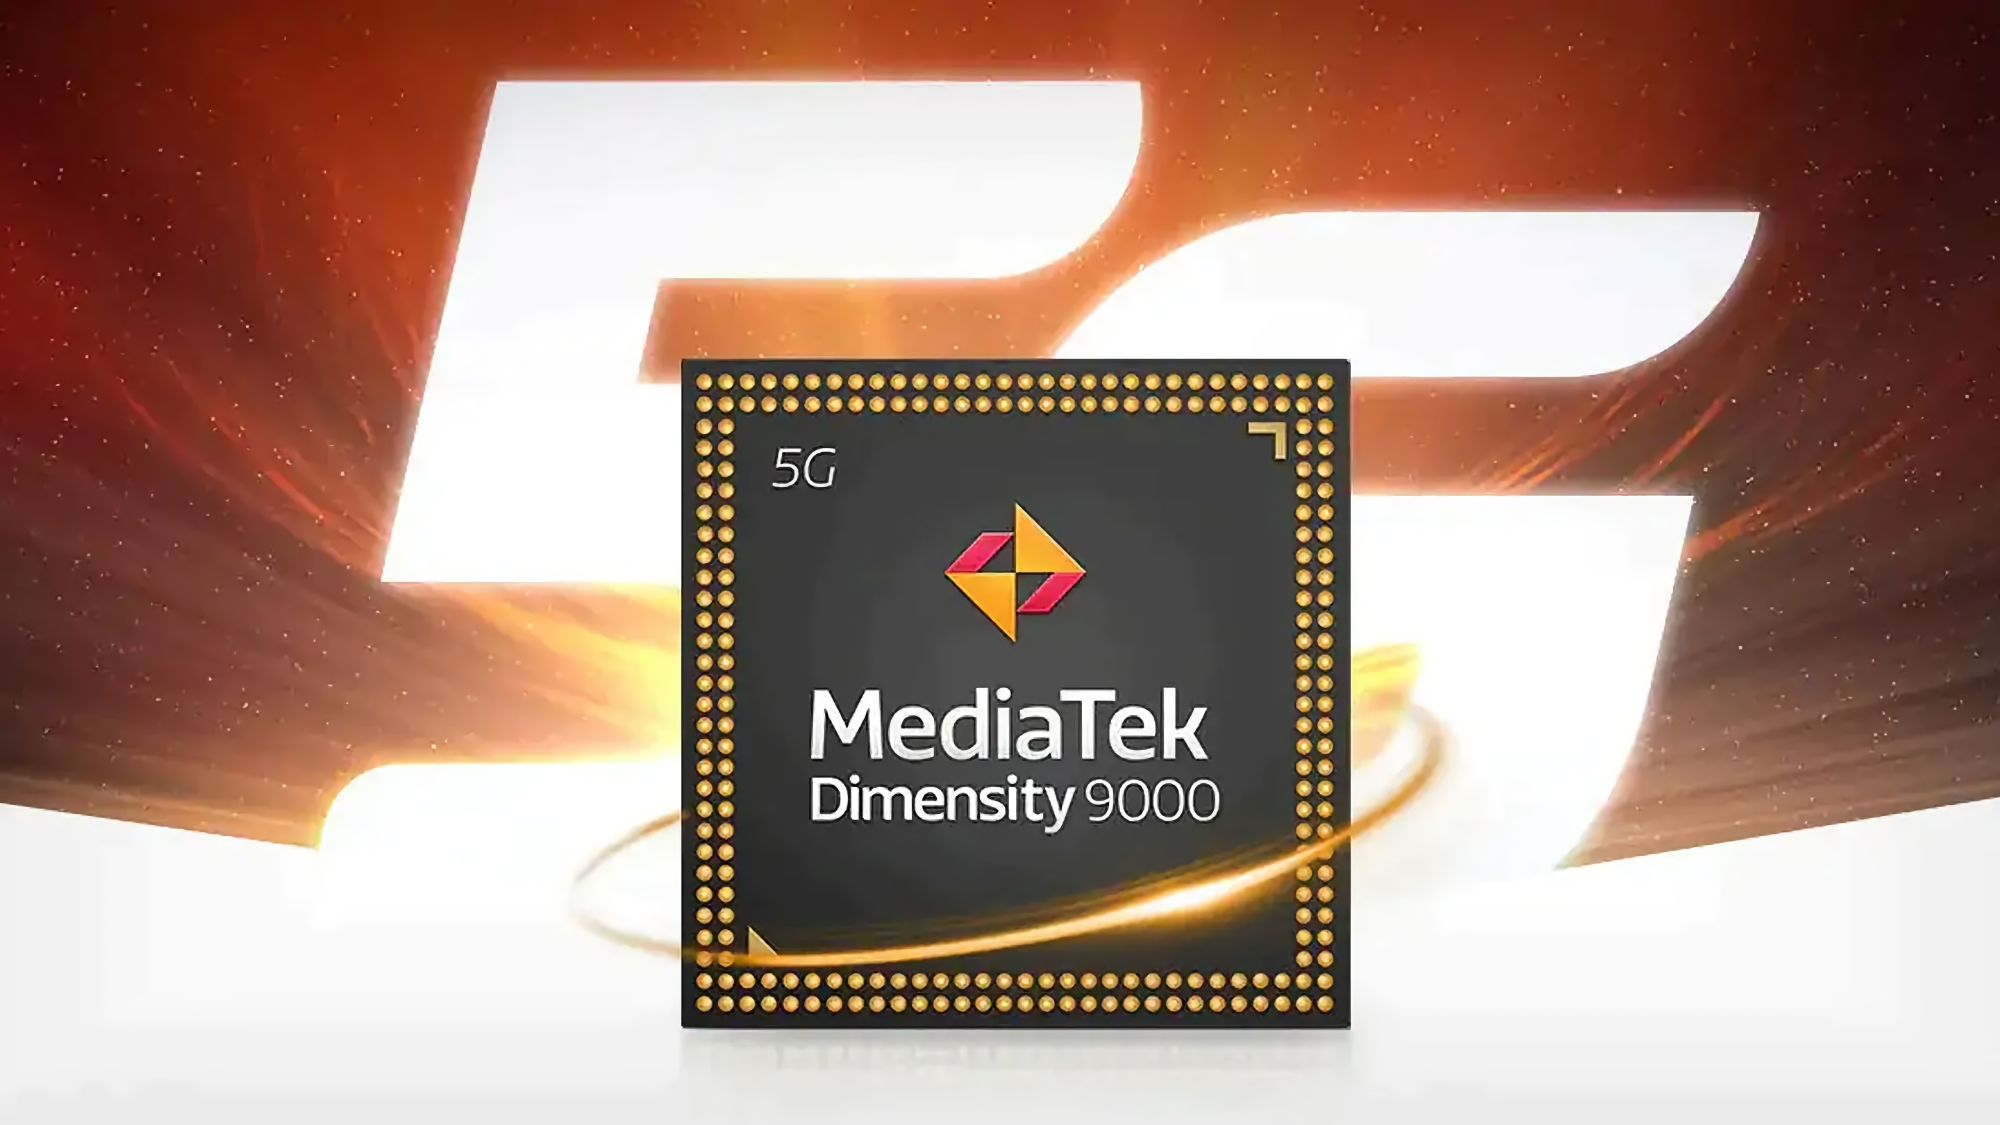 Source: the first smartphone based on the MediaTek Dimensity 9000 chip will hit the market in February